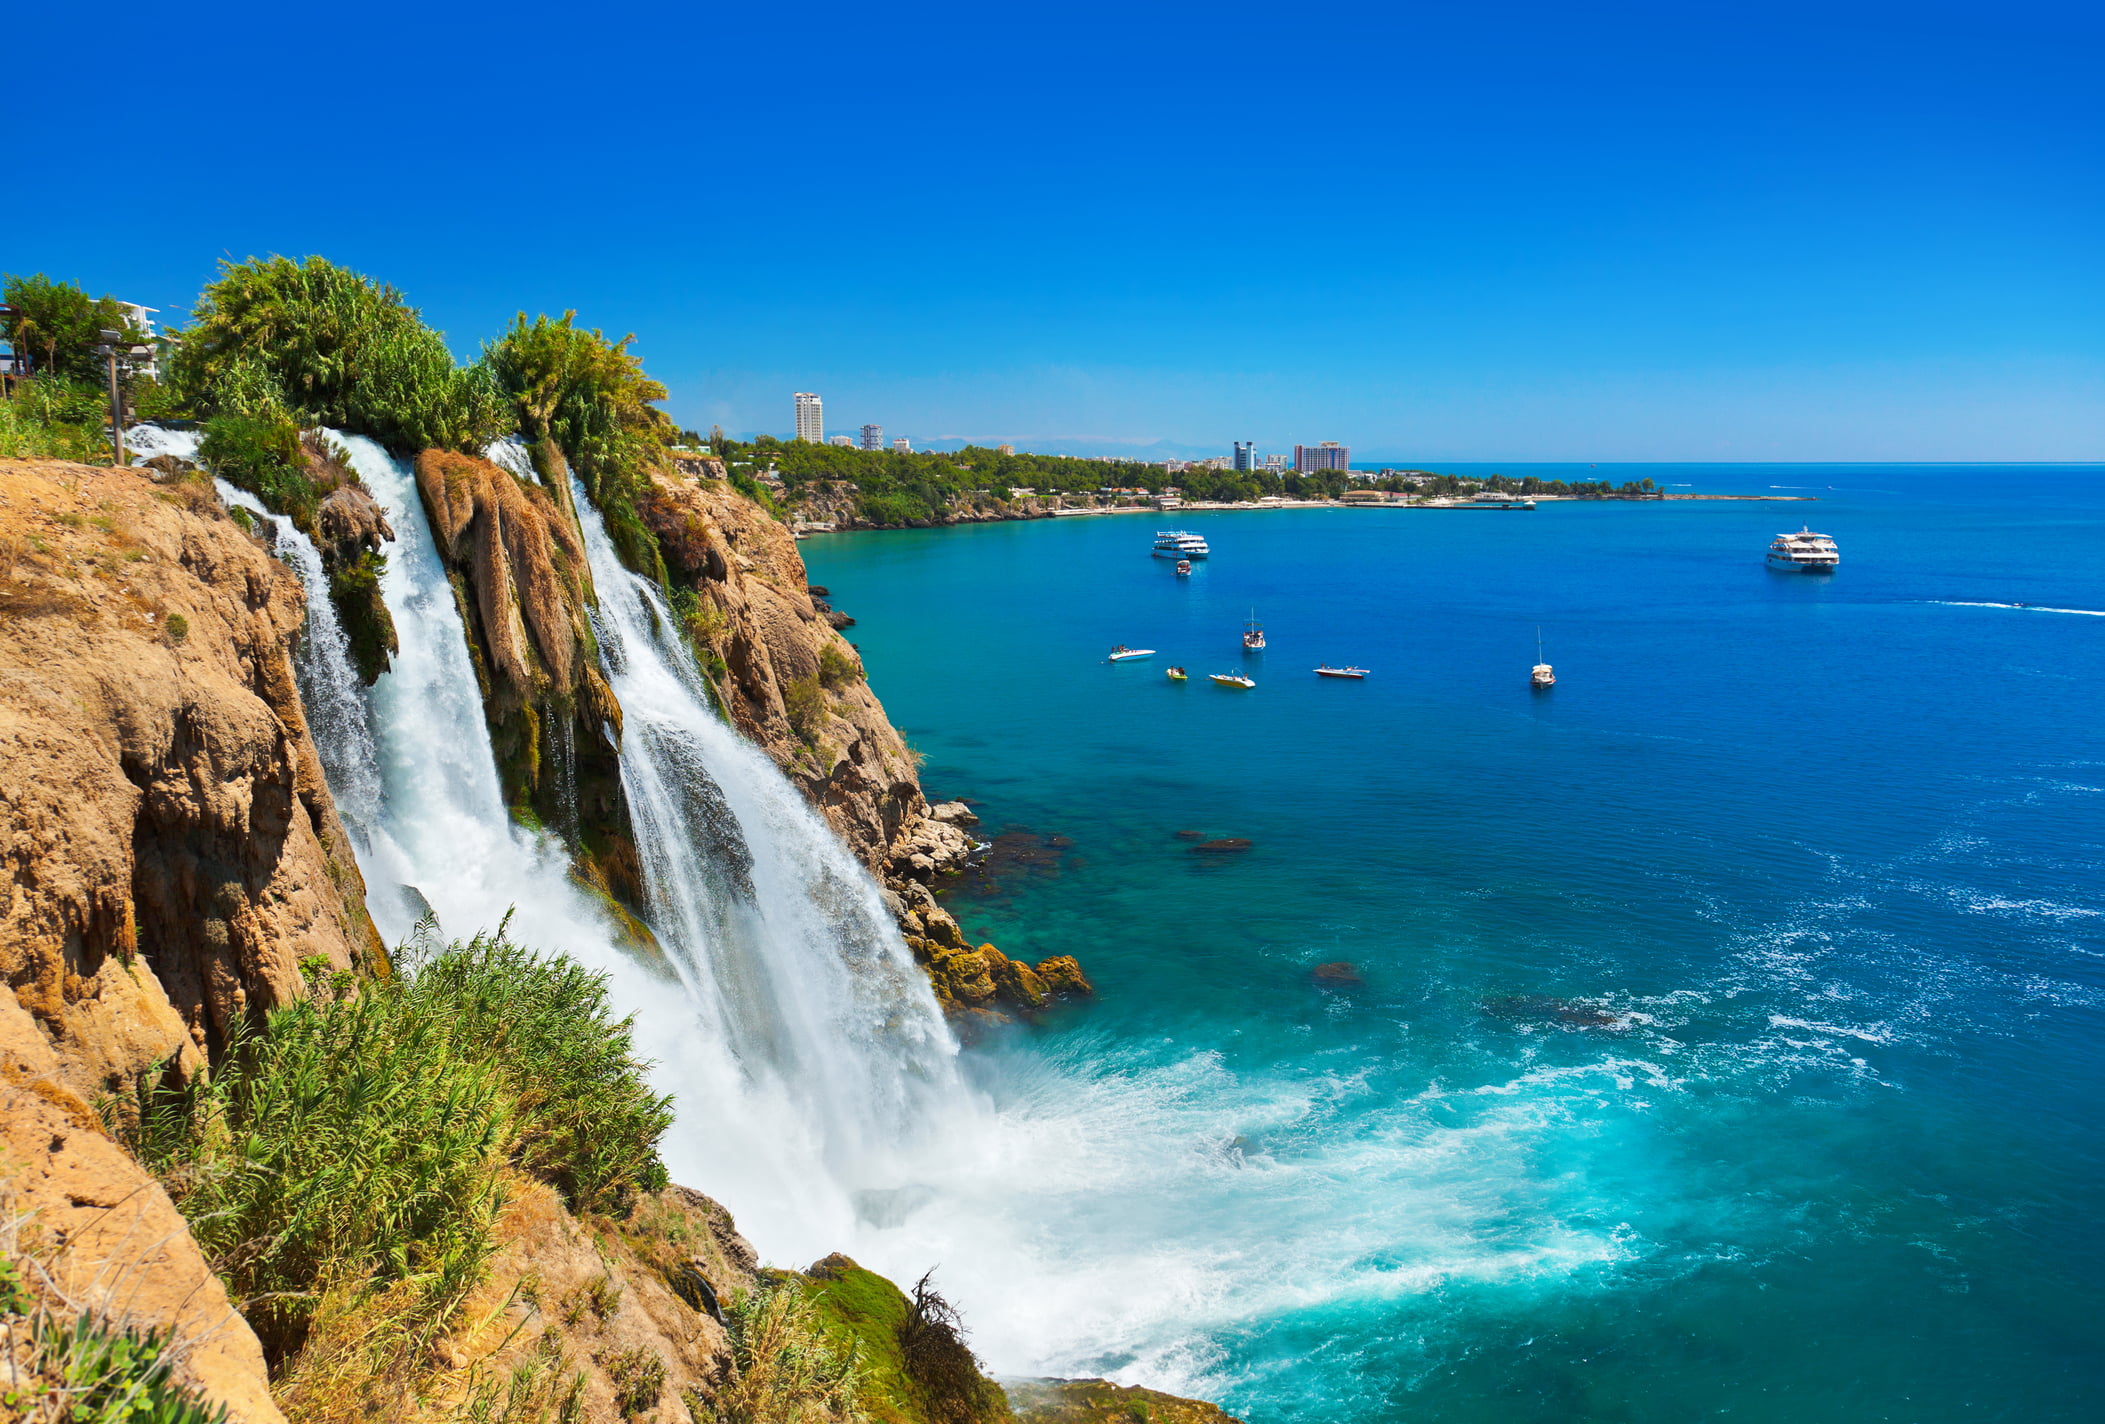 sustainable homebuyers should consider getting a property in Antalya